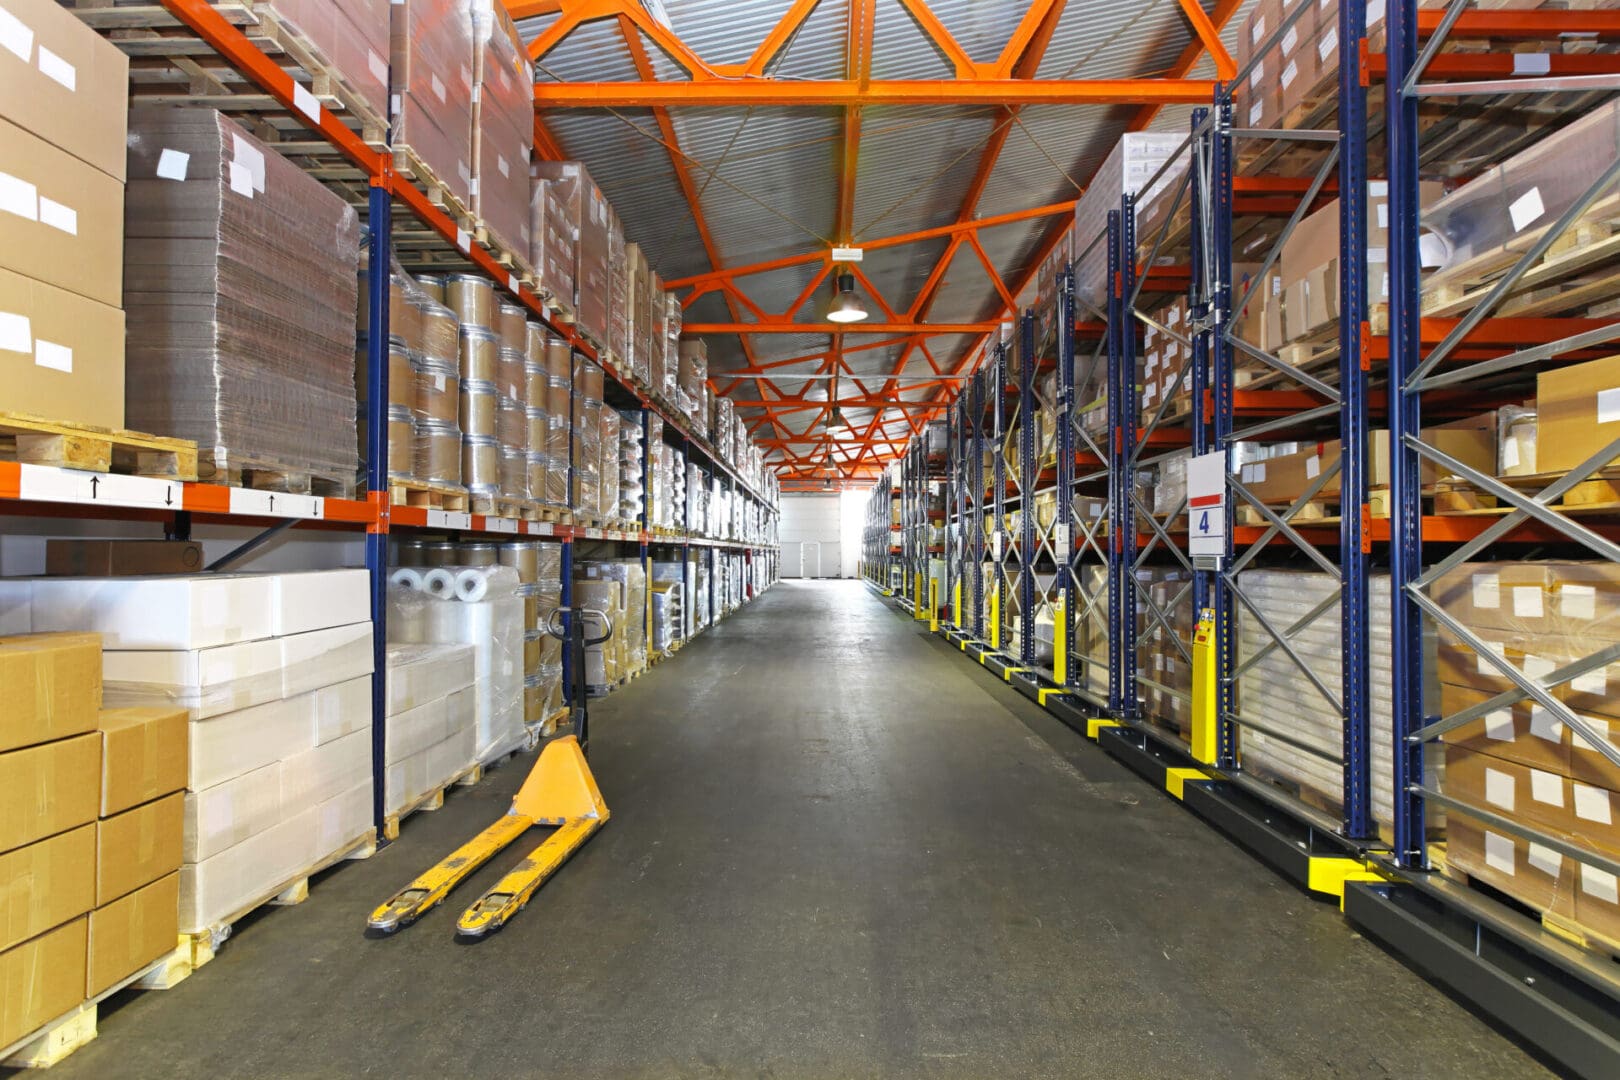 A warehouse with many boxes and pallets of goods.